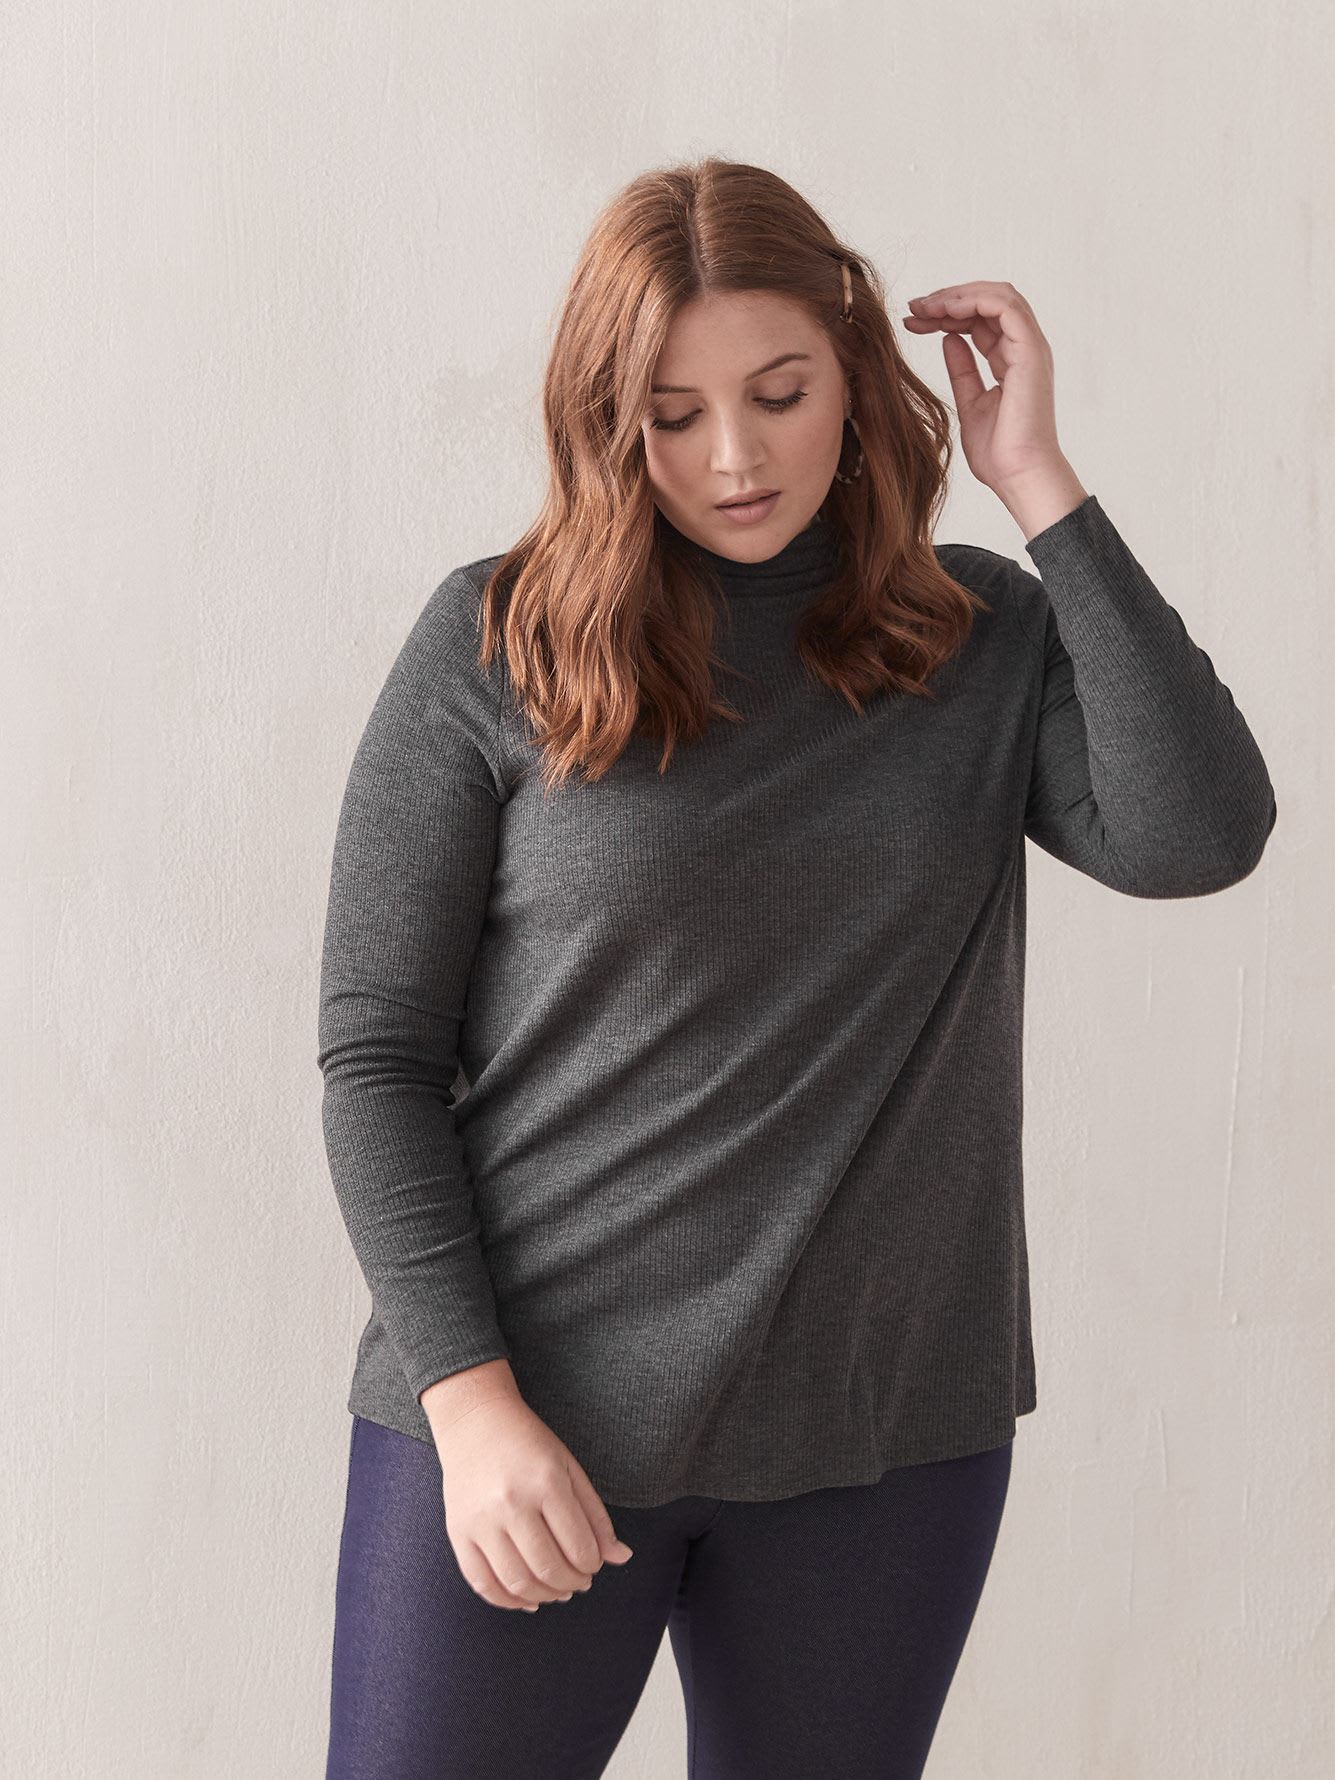 Long-Sleeve Ribbed Top - Addition Elle | Penningtons